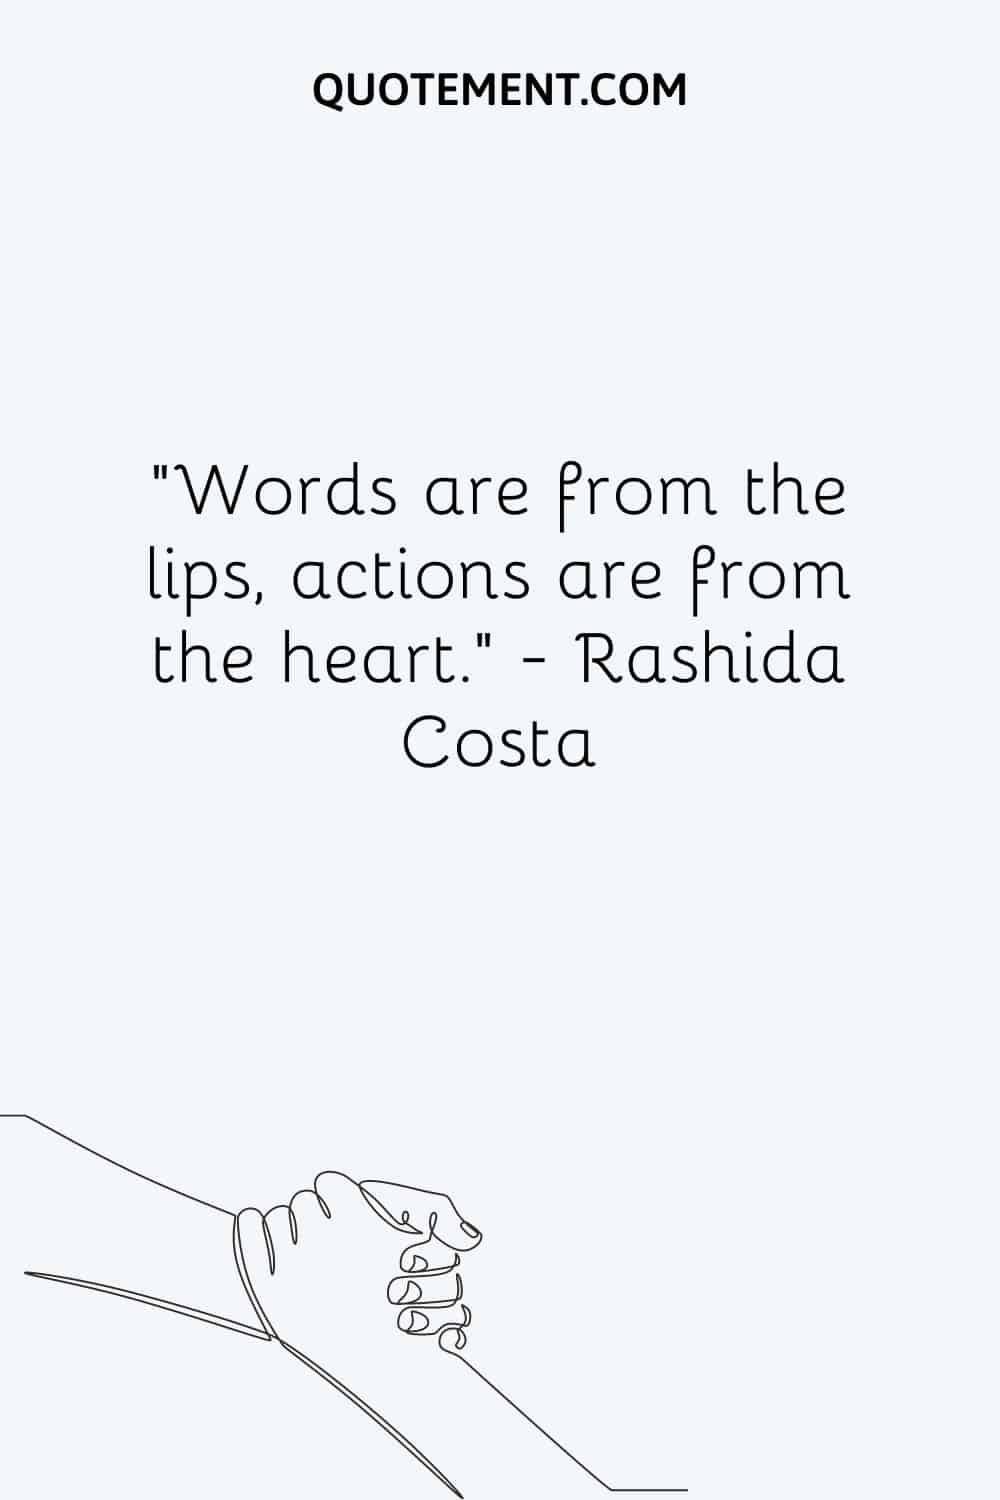 Words are from the lips, actions are from the heart